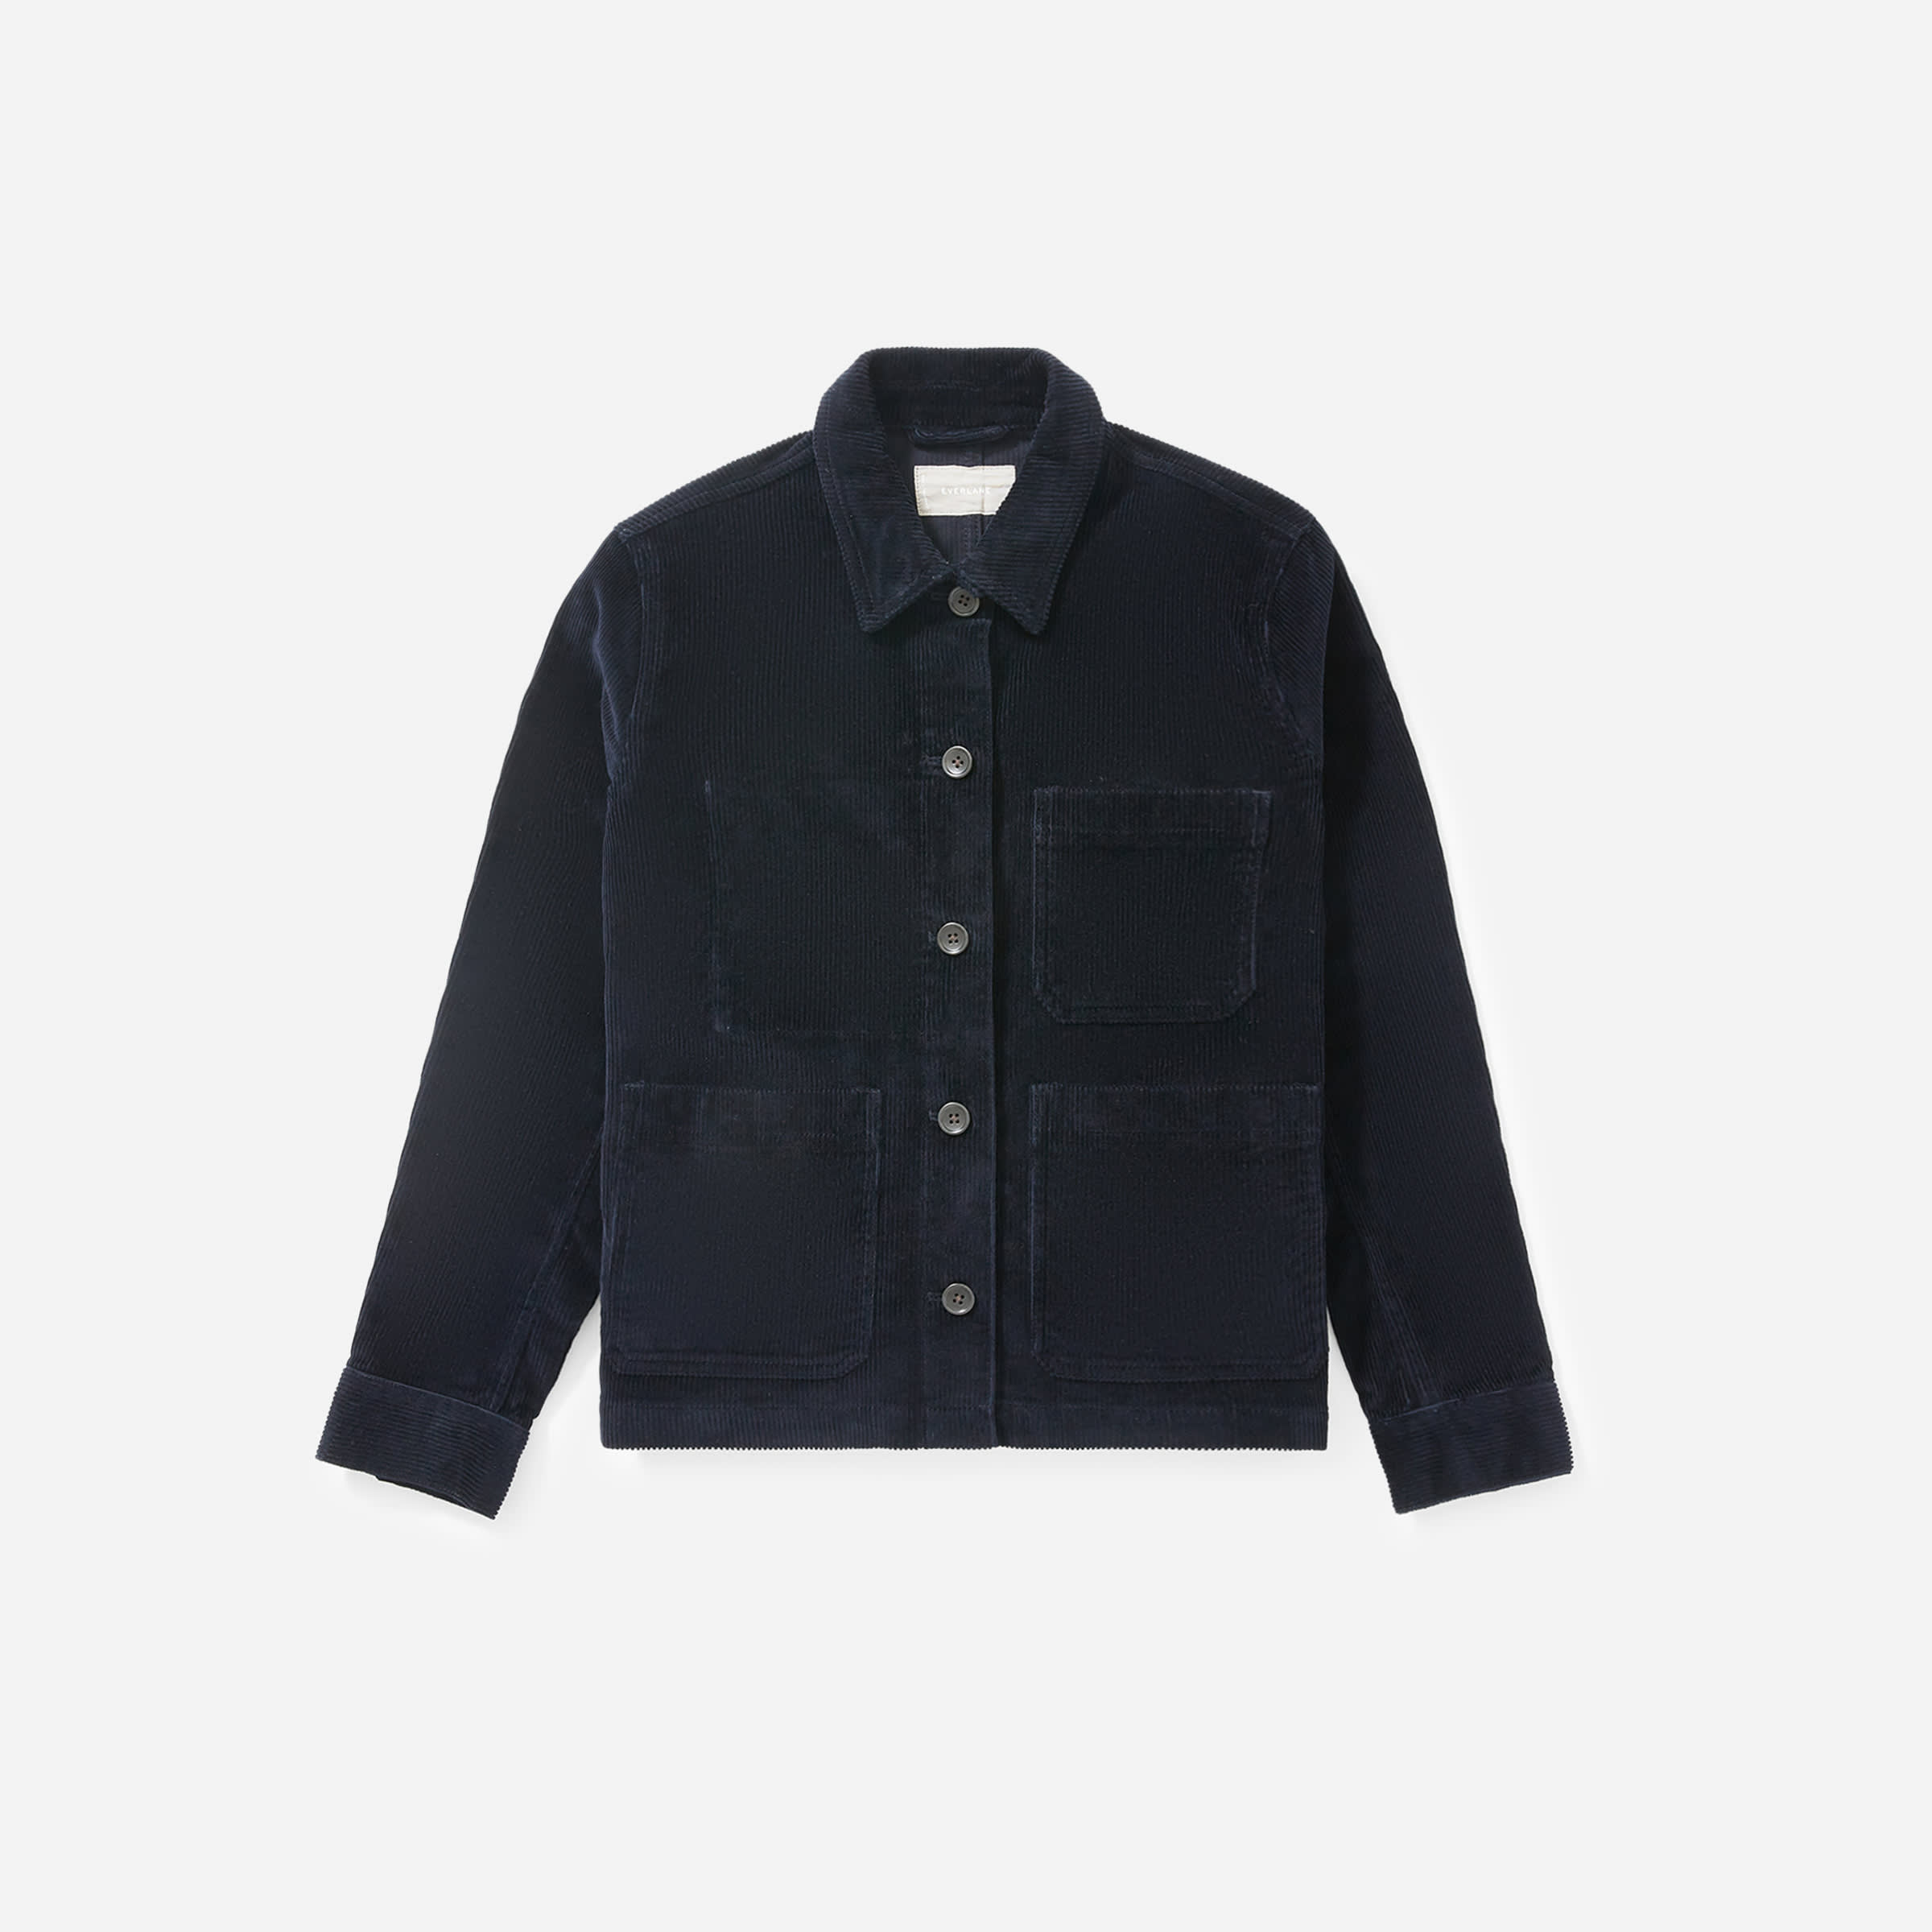 Trend Alert! The Shackets – The Shirt Jackets That Can Transition Into ...